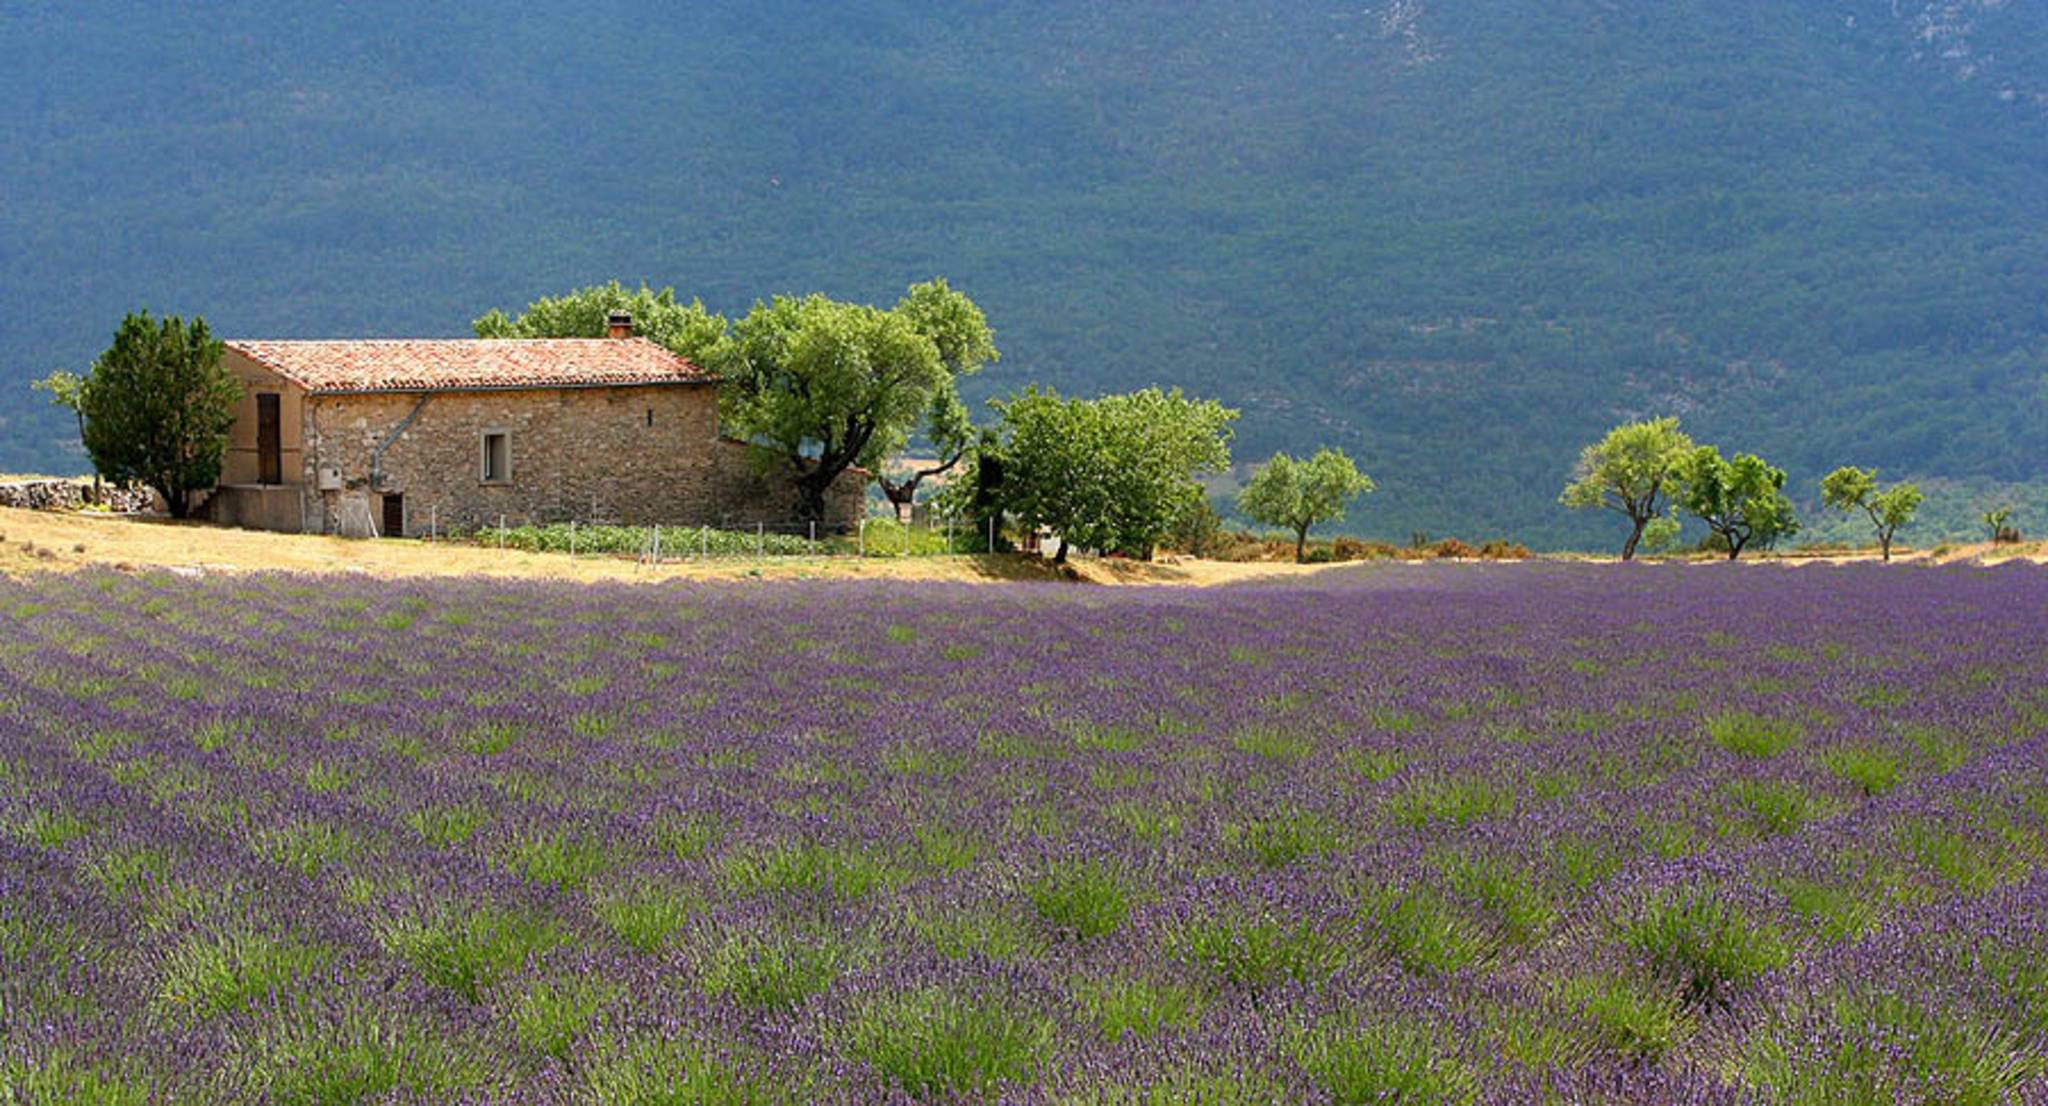 Farm houses and lavenders compose a typical landscape of Provence, France